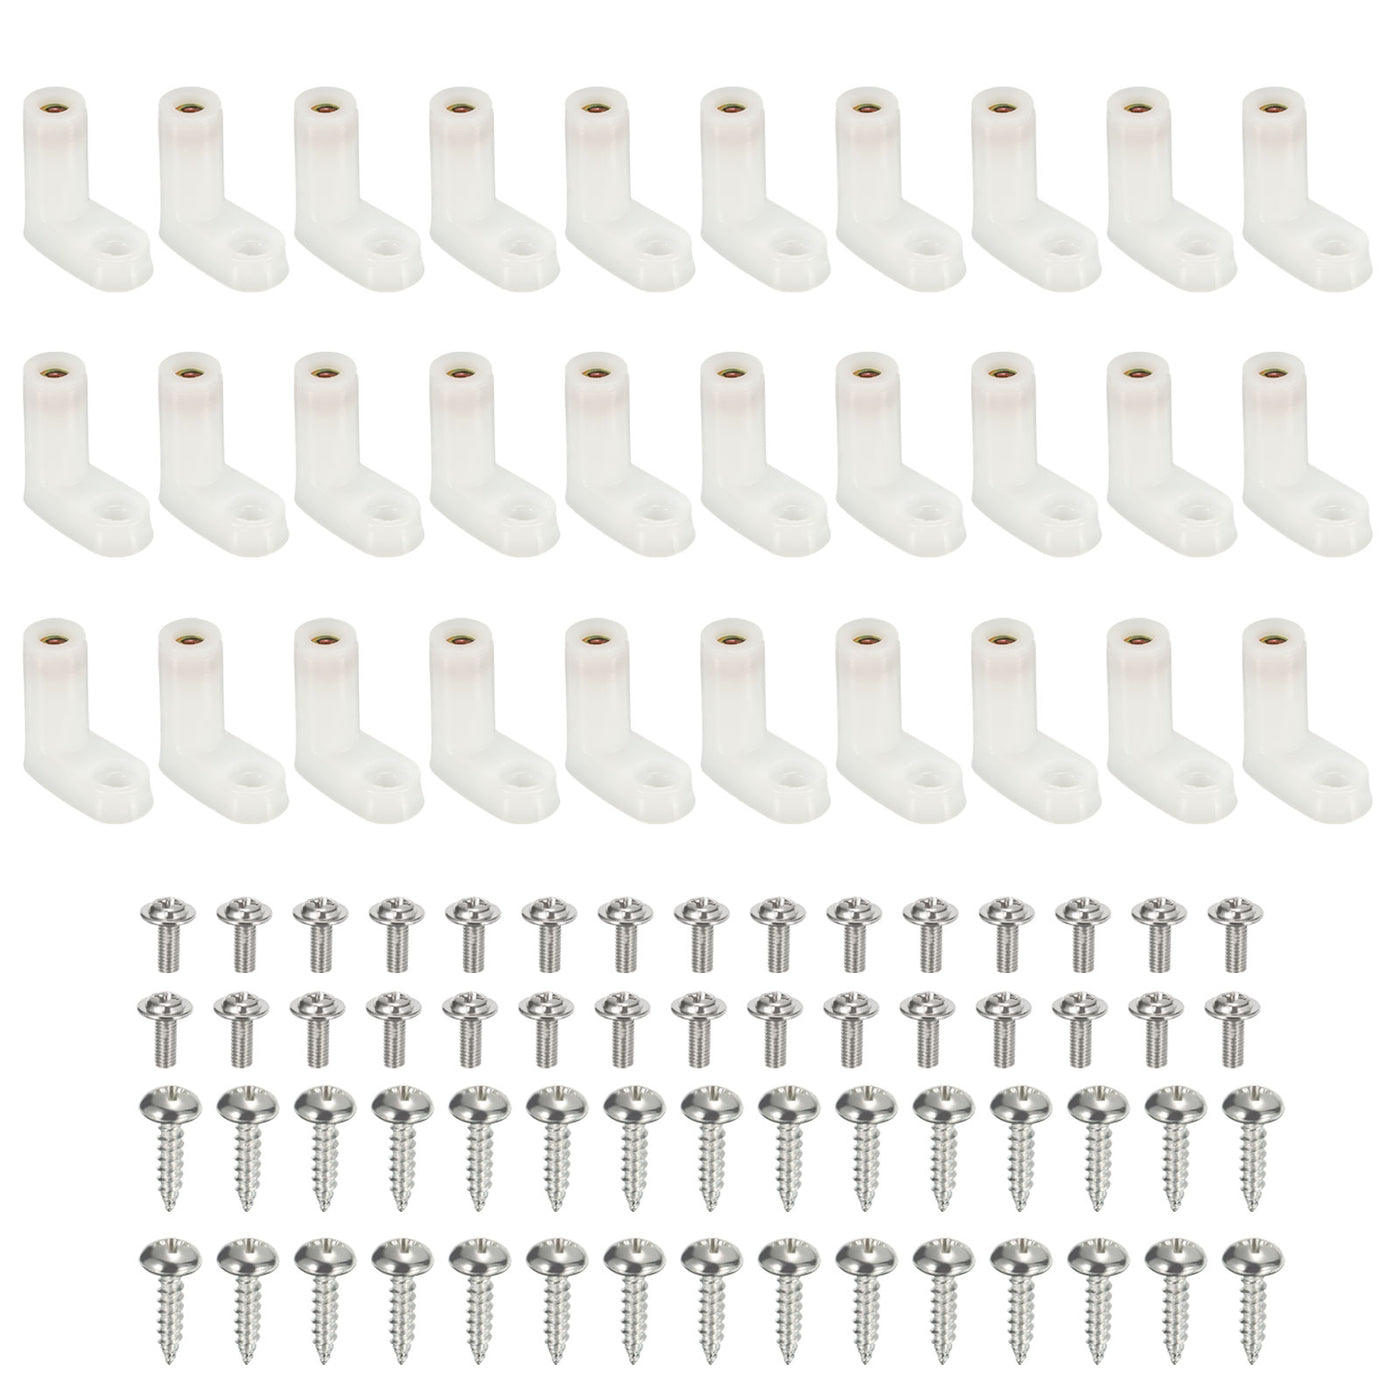 uxcell Uxcell 30 Pcs Circuit Board L Shape Insulated PCB Spacer 20mm Standoffs Mounting Feet Supporting Height with Screws White